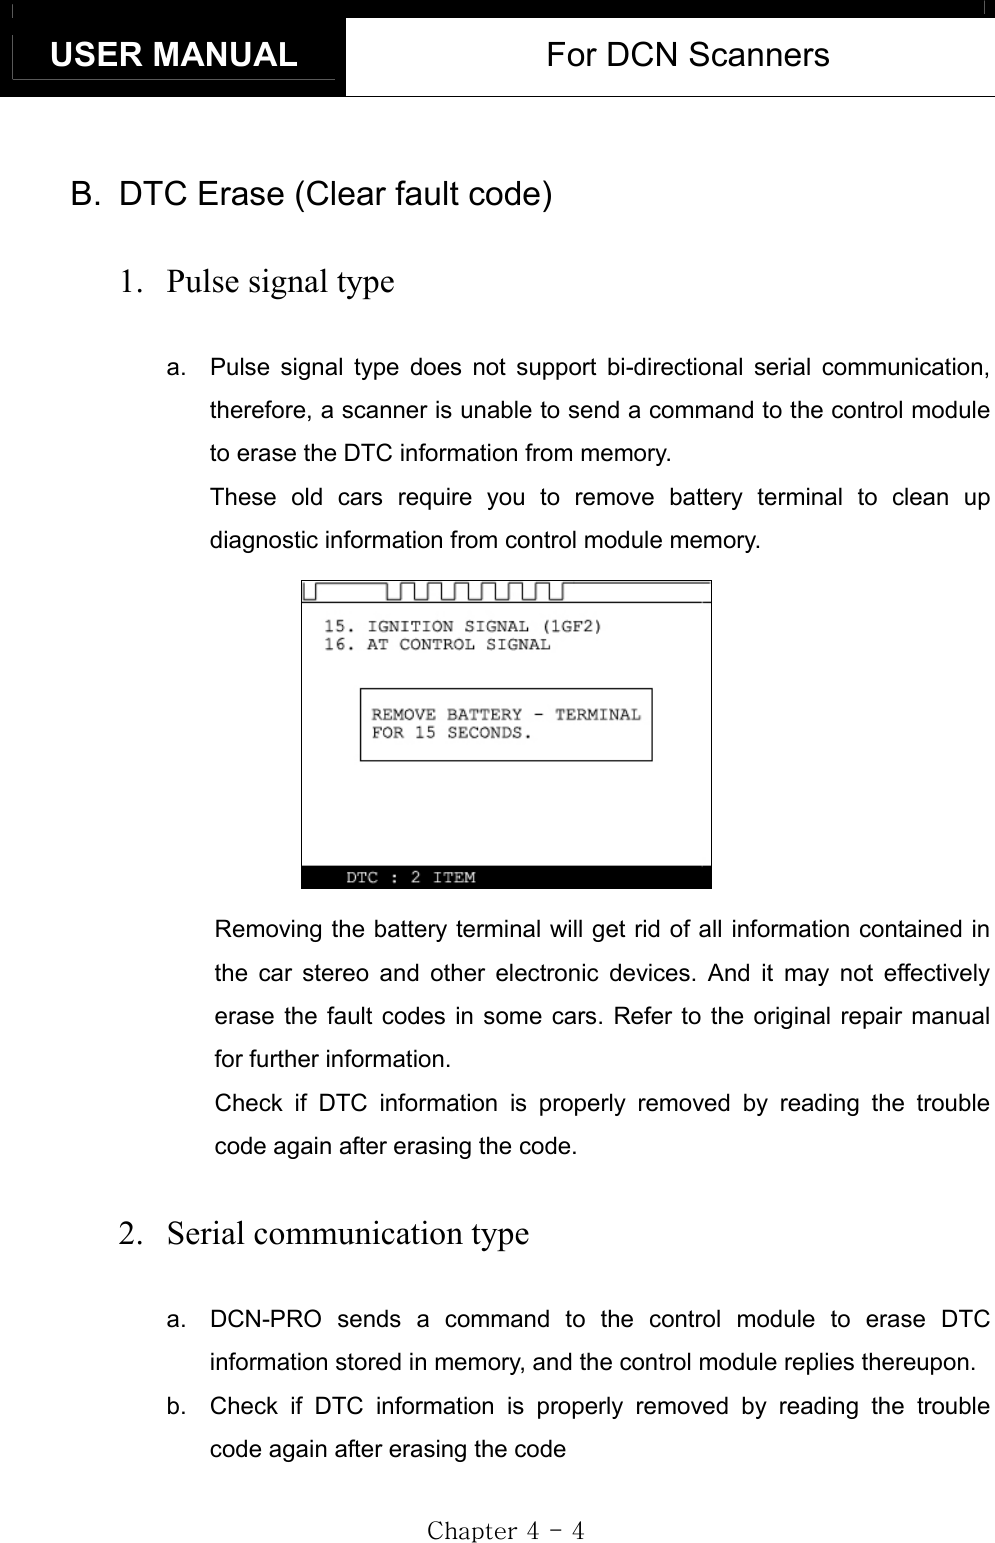 USER MANUAL  For DCN Scanners GjG[GTG[GB.  DTC Erase (Clear fault code) 1.  Pulse signal type a.  Pulse signal type does not support bi-directional serial communication, therefore, a scanner is unable to send a command to the control module to erase the DTC information from memory.     These old cars require you to remove battery terminal to clean up diagnostic information from control module memory. Removing the battery terminal will get rid of all information contained in the car stereo and other electronic devices. And it may not effectively erase the fault codes in some cars. Refer to the original repair manual for further information. Check if DTC information is properly removed by reading the trouble code again after erasing the code. 2.  Serial communication type a.  DCN-PRO sends a command to the control module to erase DTC information stored in memory, and the control module replies thereupon. b.  Check if DTC information is properly removed by reading the trouble code again after erasing the code 